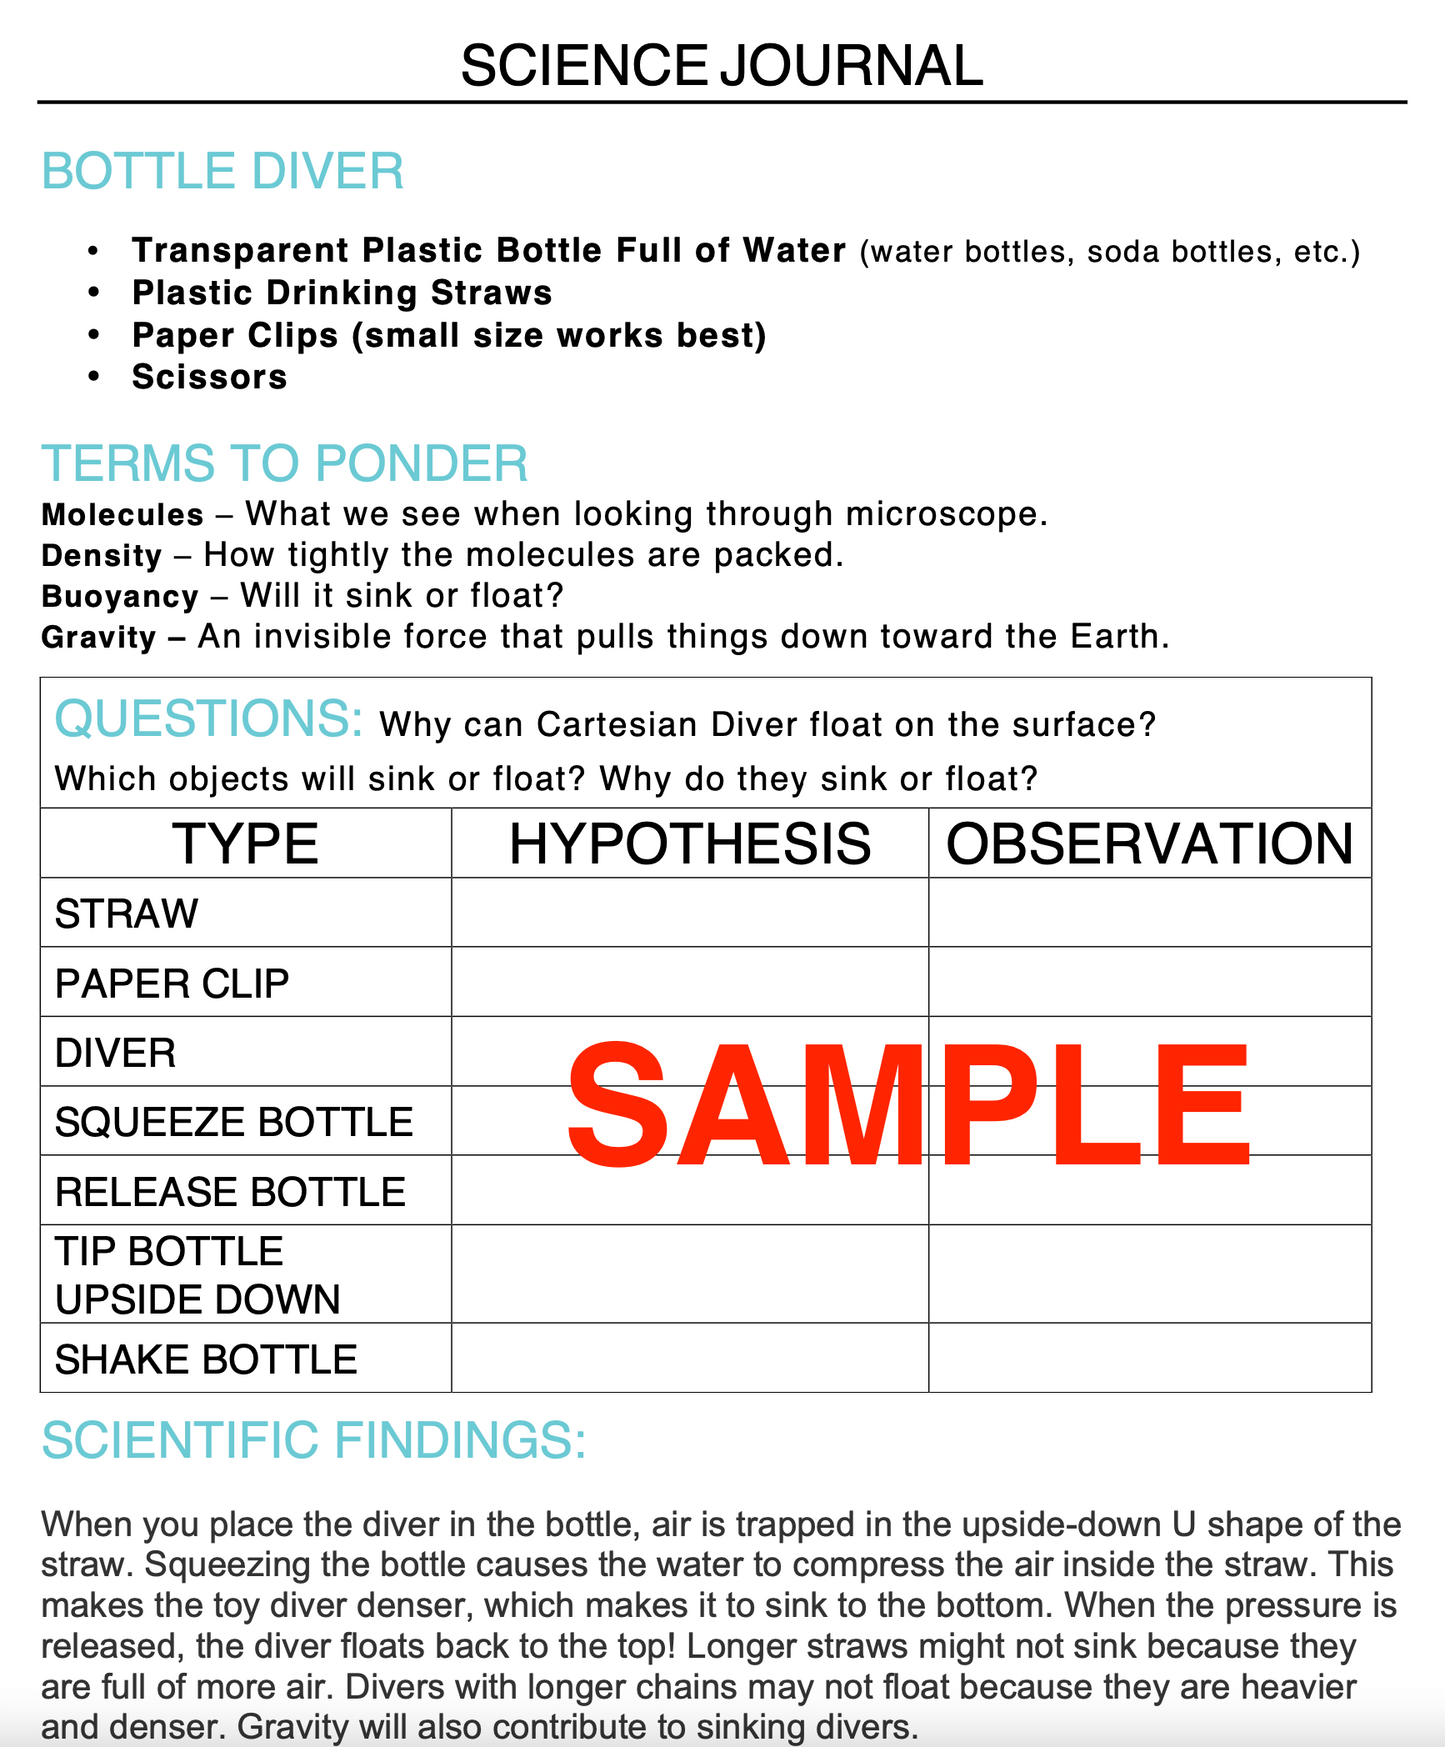 Cartesian Bottle Diver Science Experiment Journal & Step-By-Step Instructions